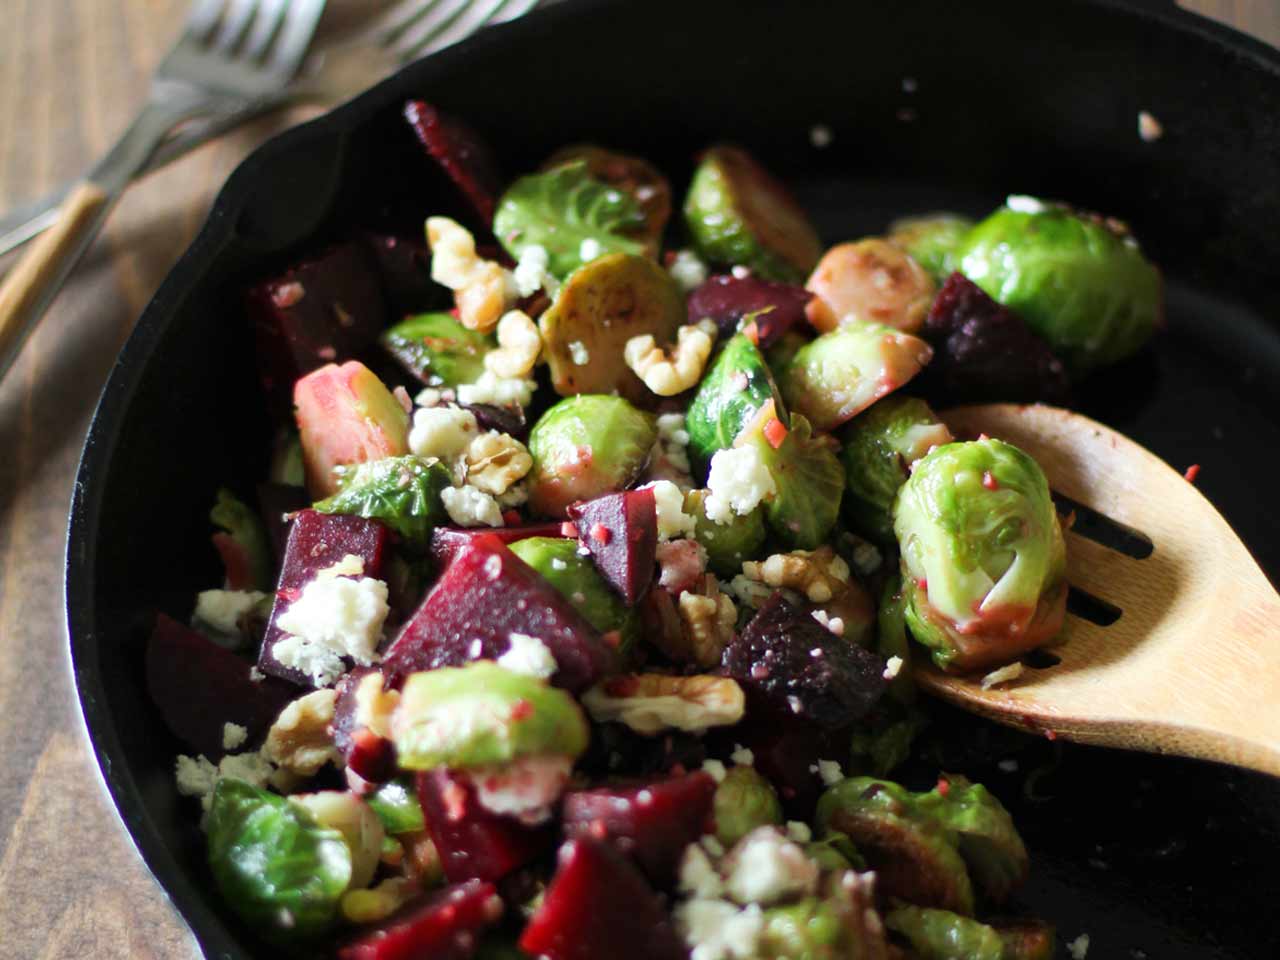 Honey-glazed Brussels sprouts with beetroot